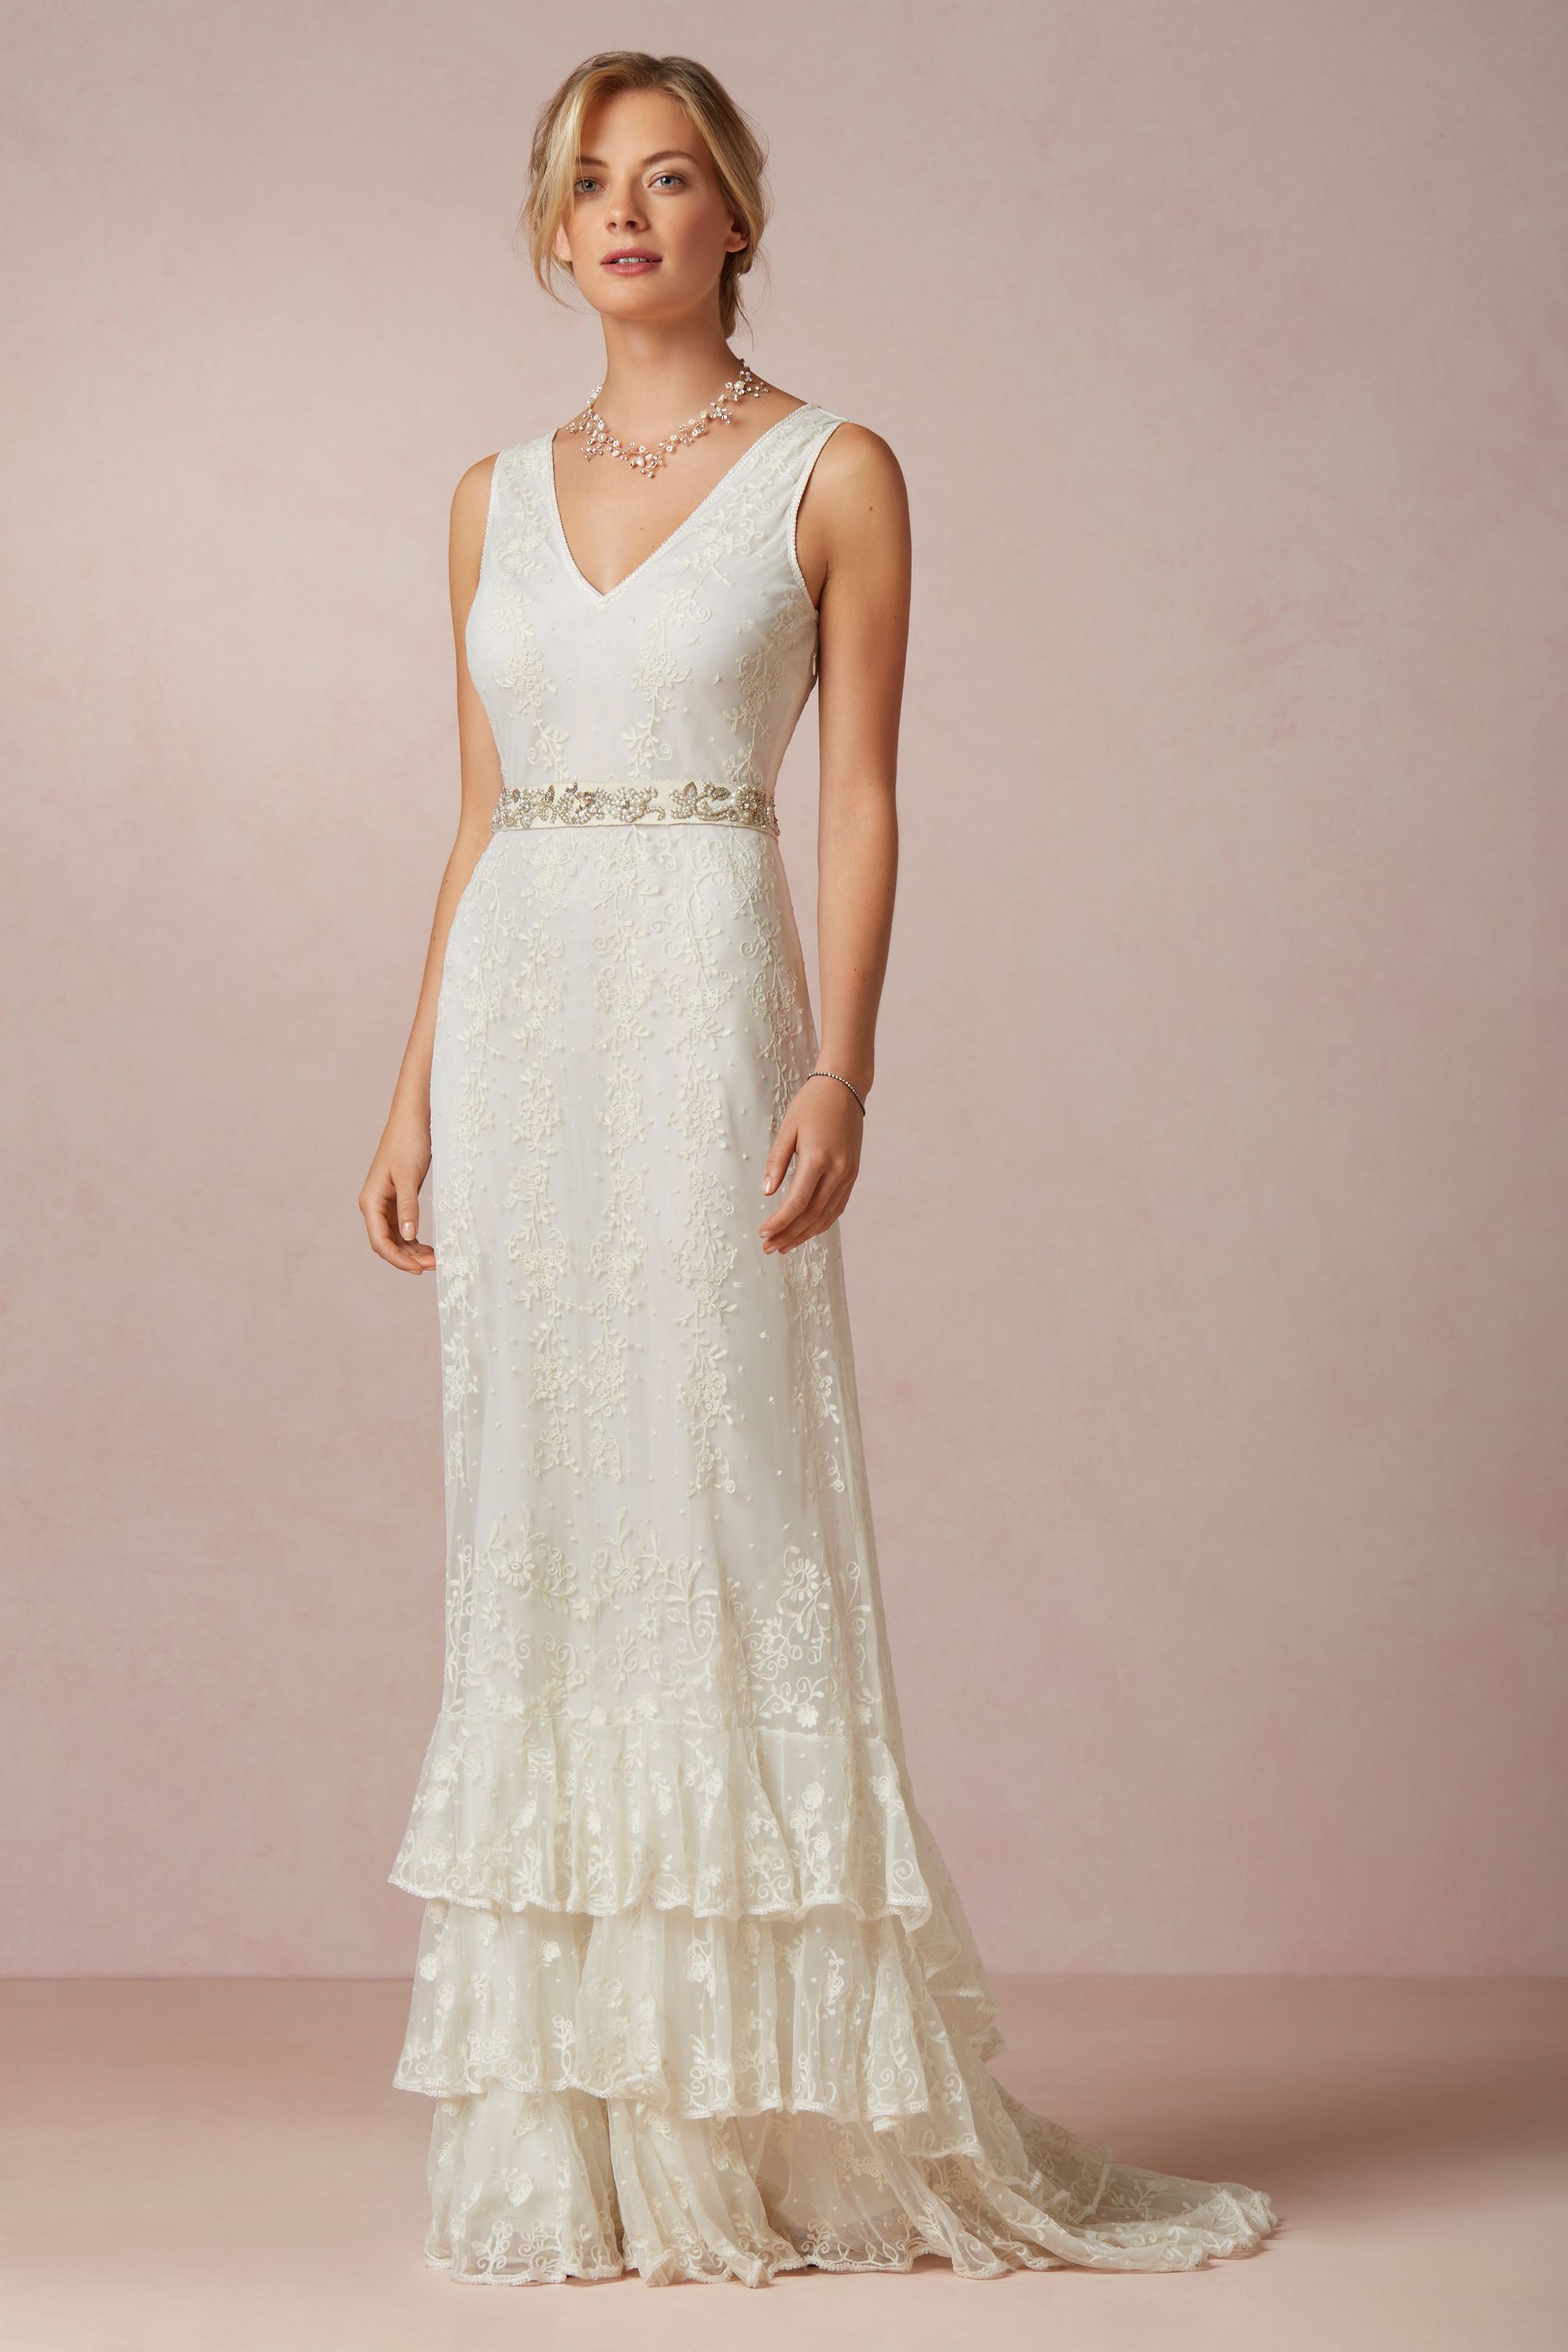 Madeline Gown in Bride | BHLDN